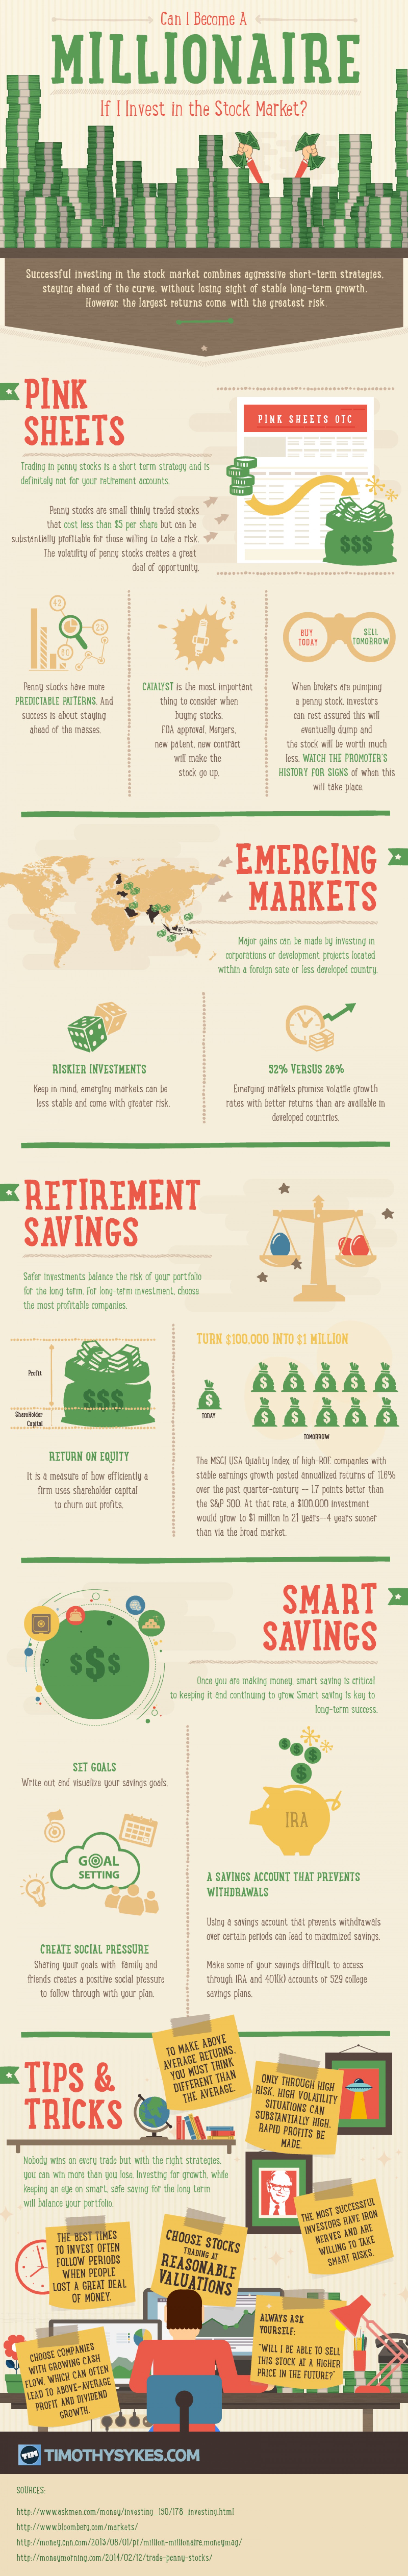 Visual Capitalist's infographic with useful tips for investing